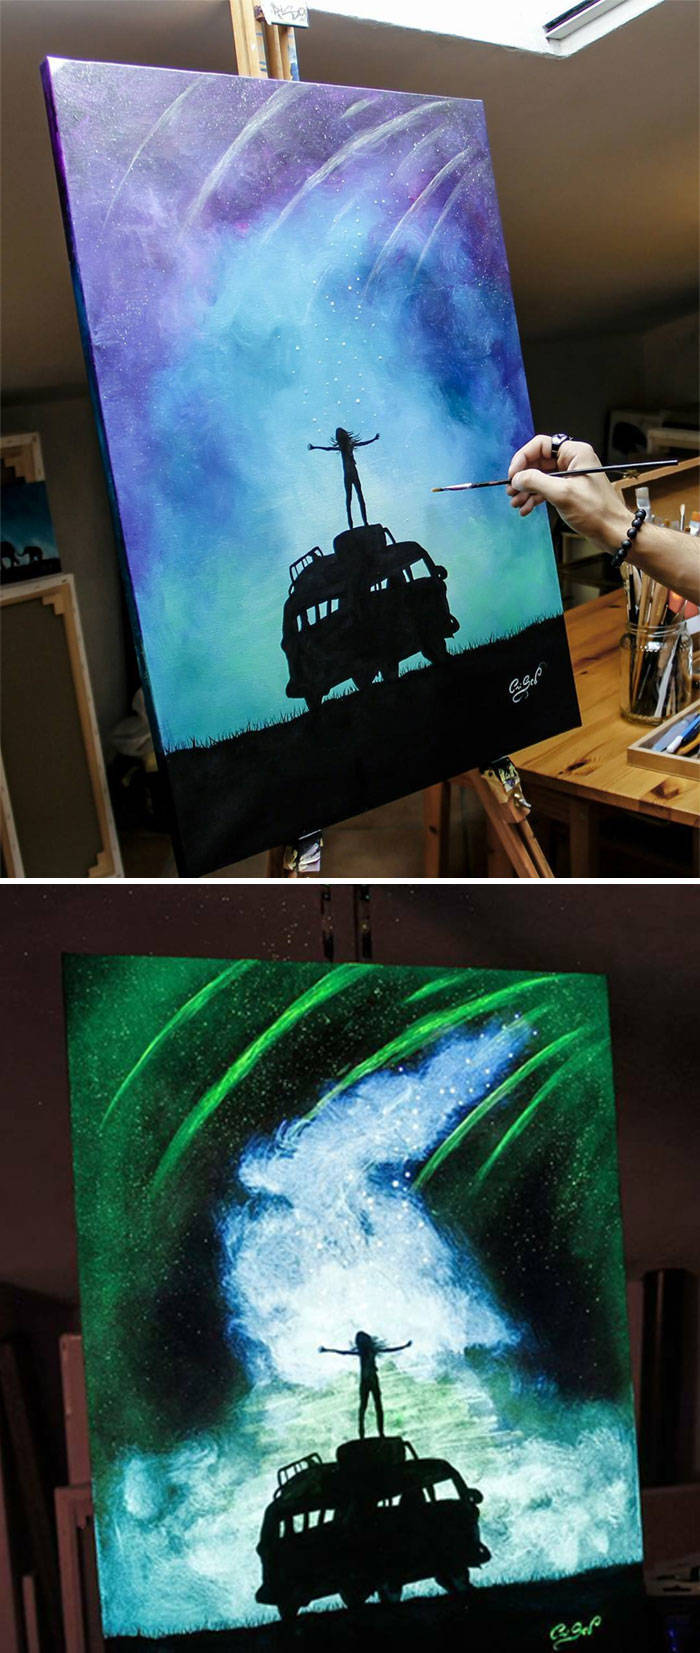 Turn Off The Lights And You Will See The Real Beauty Of These Paintings